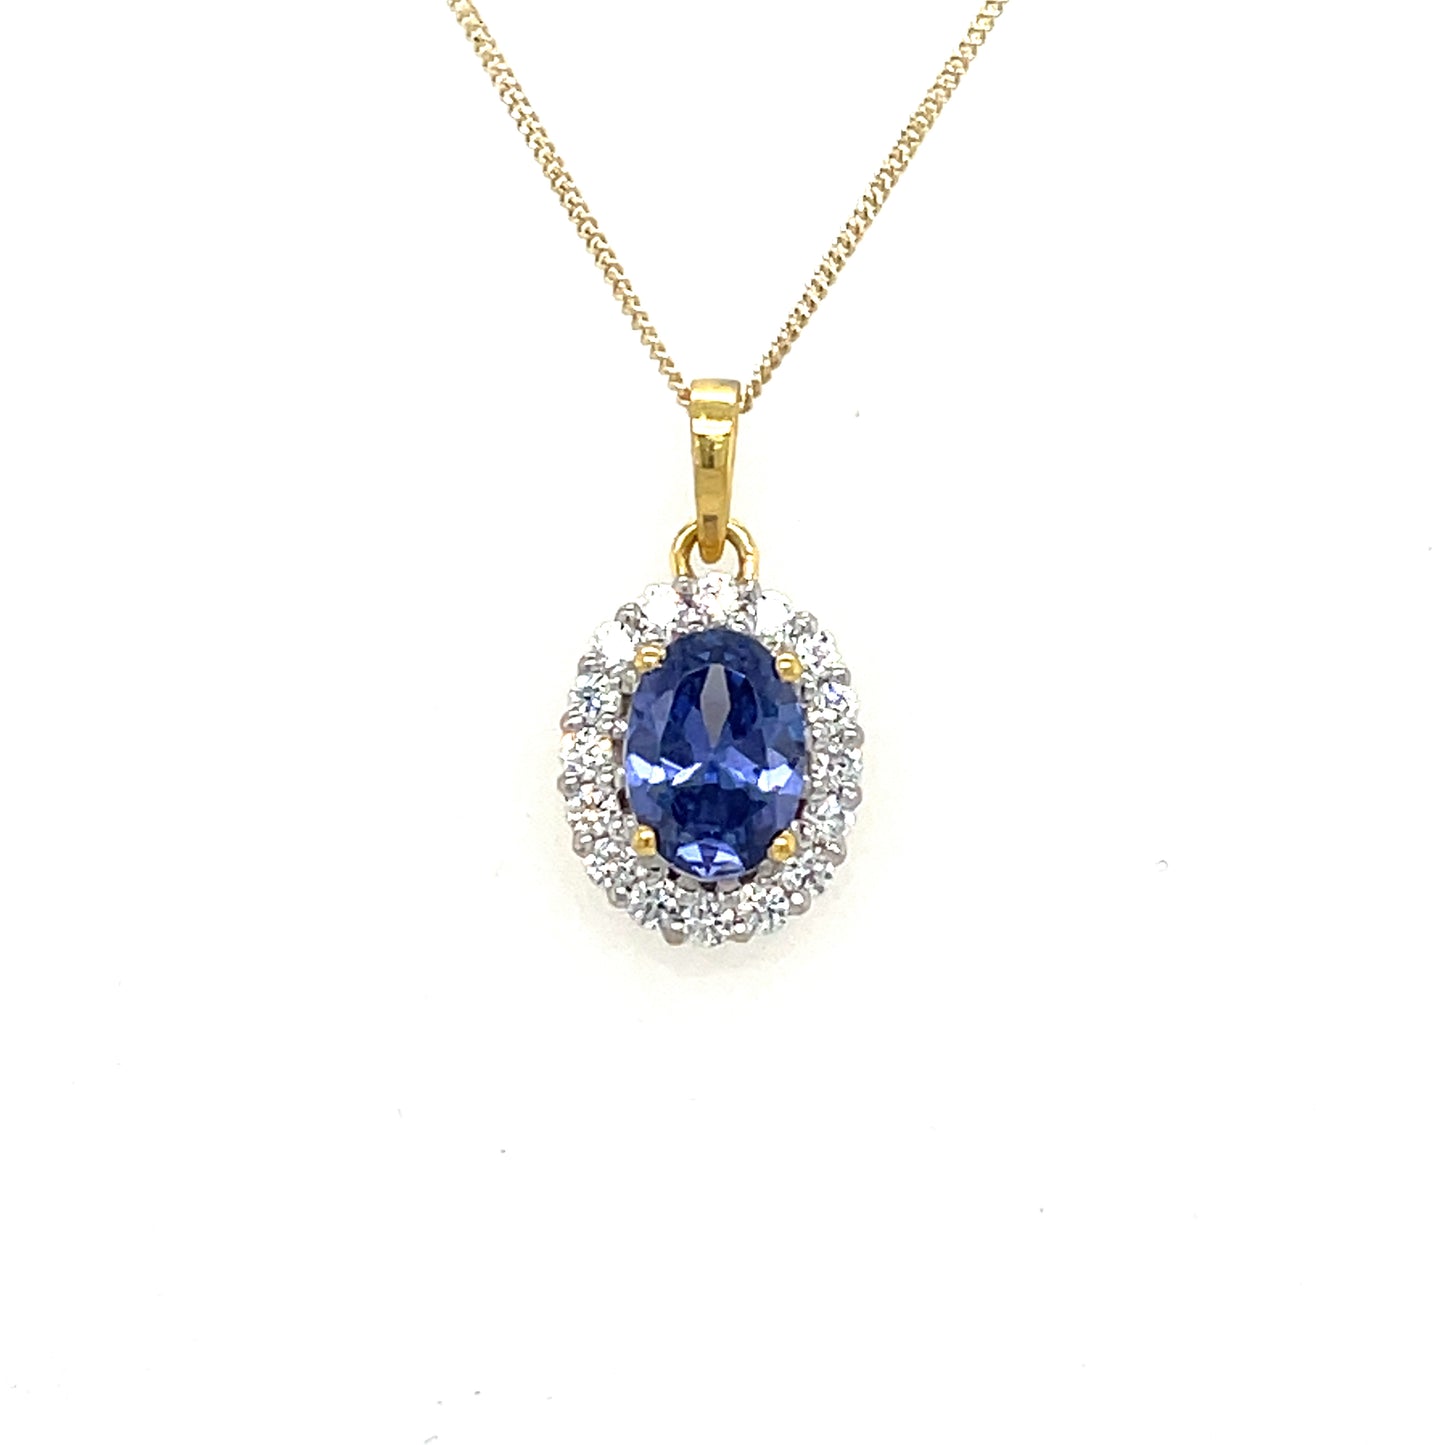 9CT Oval Cubic Zirconia and Blue Stone Pendant